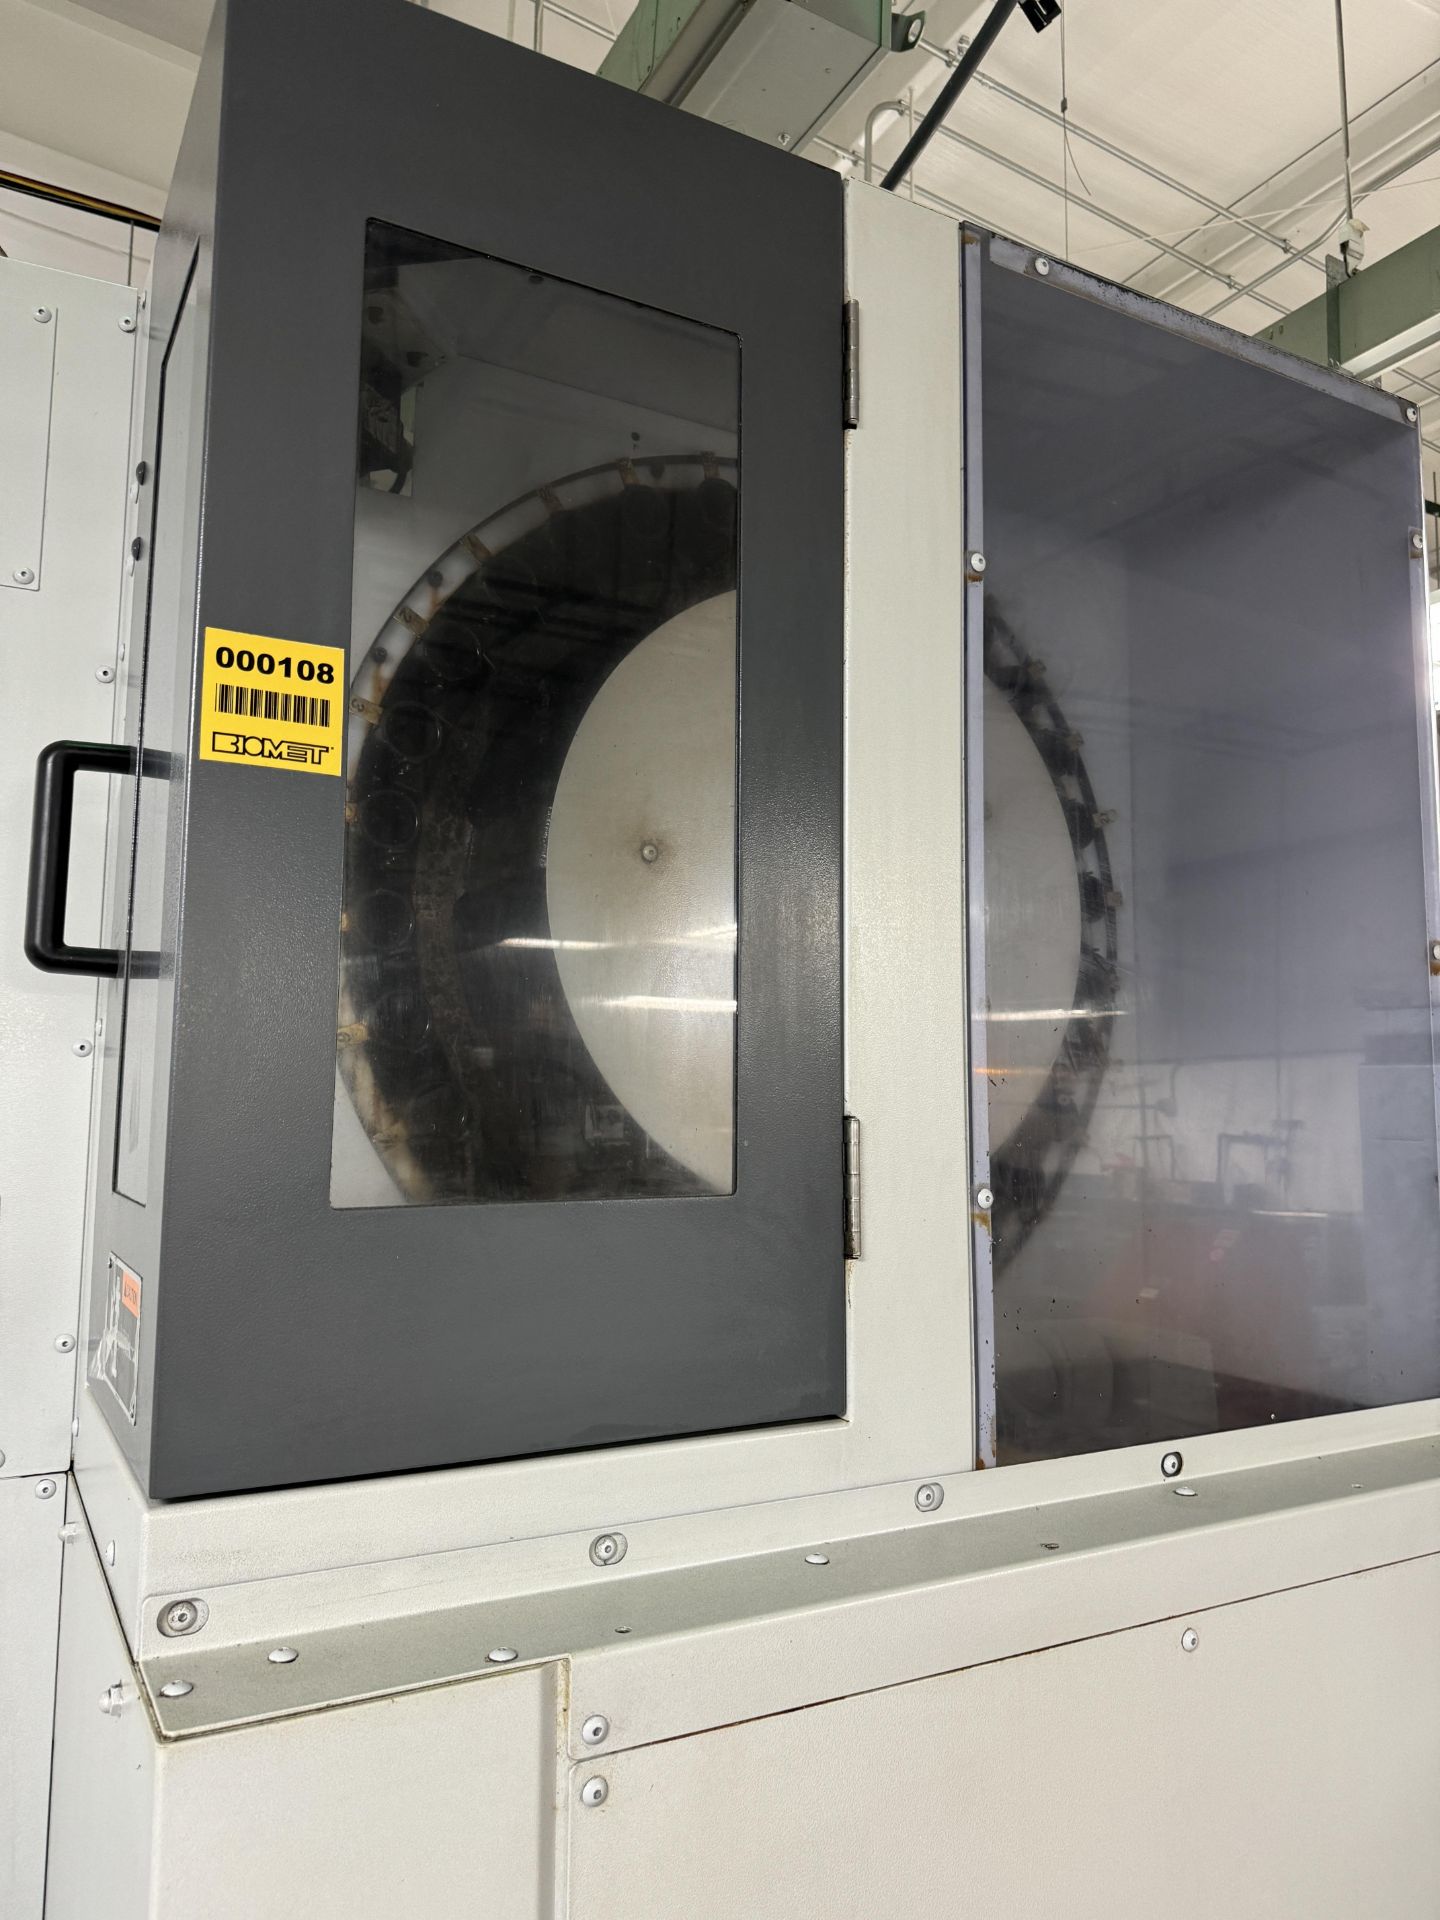 2004 MORI SEIKI NV5000?IA/40 VERTICAL MACHINING CENTER SERIAL # NV50/DH2077; MAX SPINDLE SPEED: - Image 9 of 10